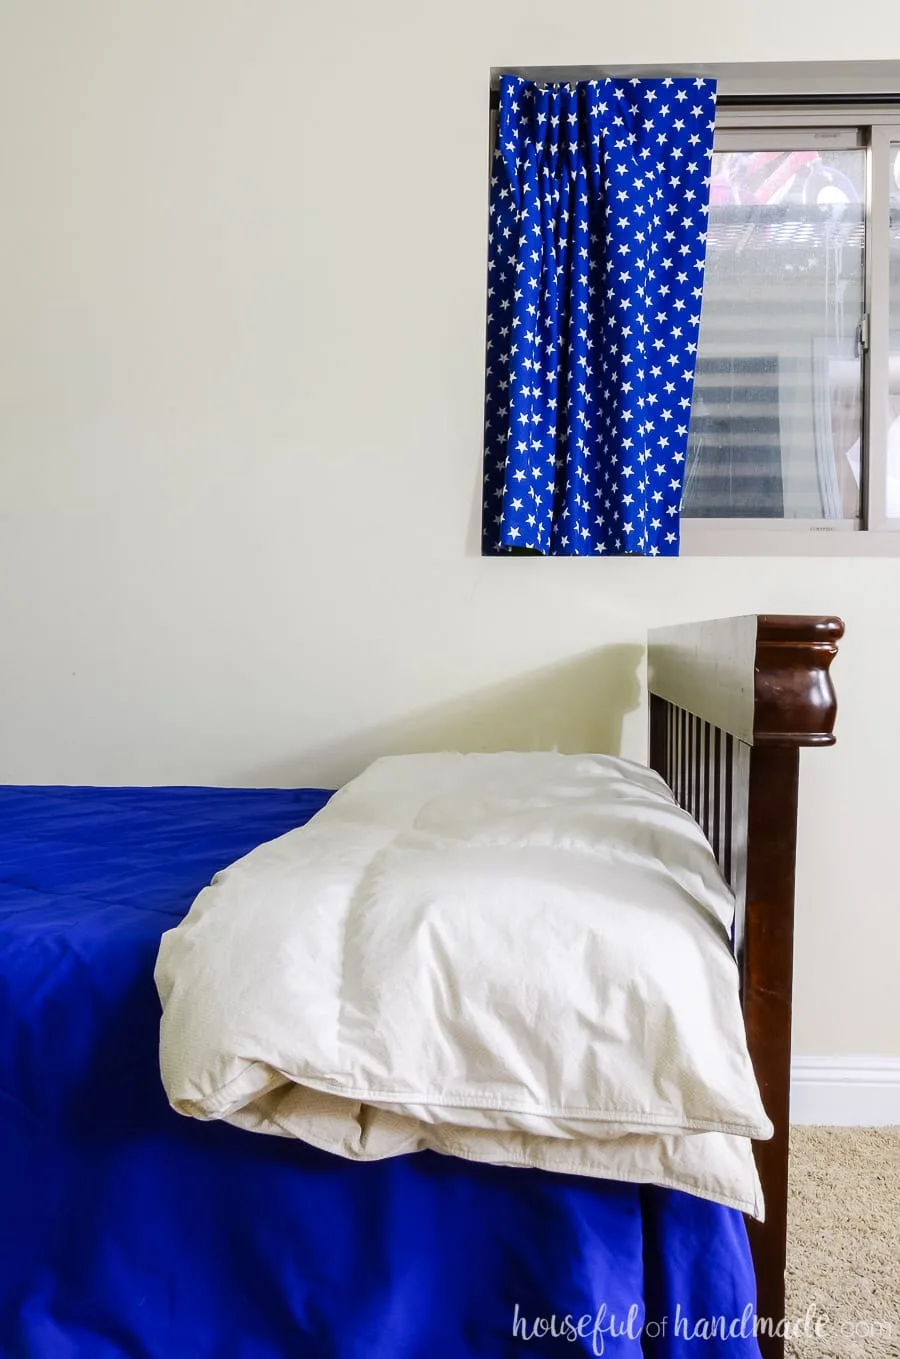 The foot of the bed with a dark wood craftsman footboard and white down comforter. Black out curtains in the window with blue fabric with white stars on it. 